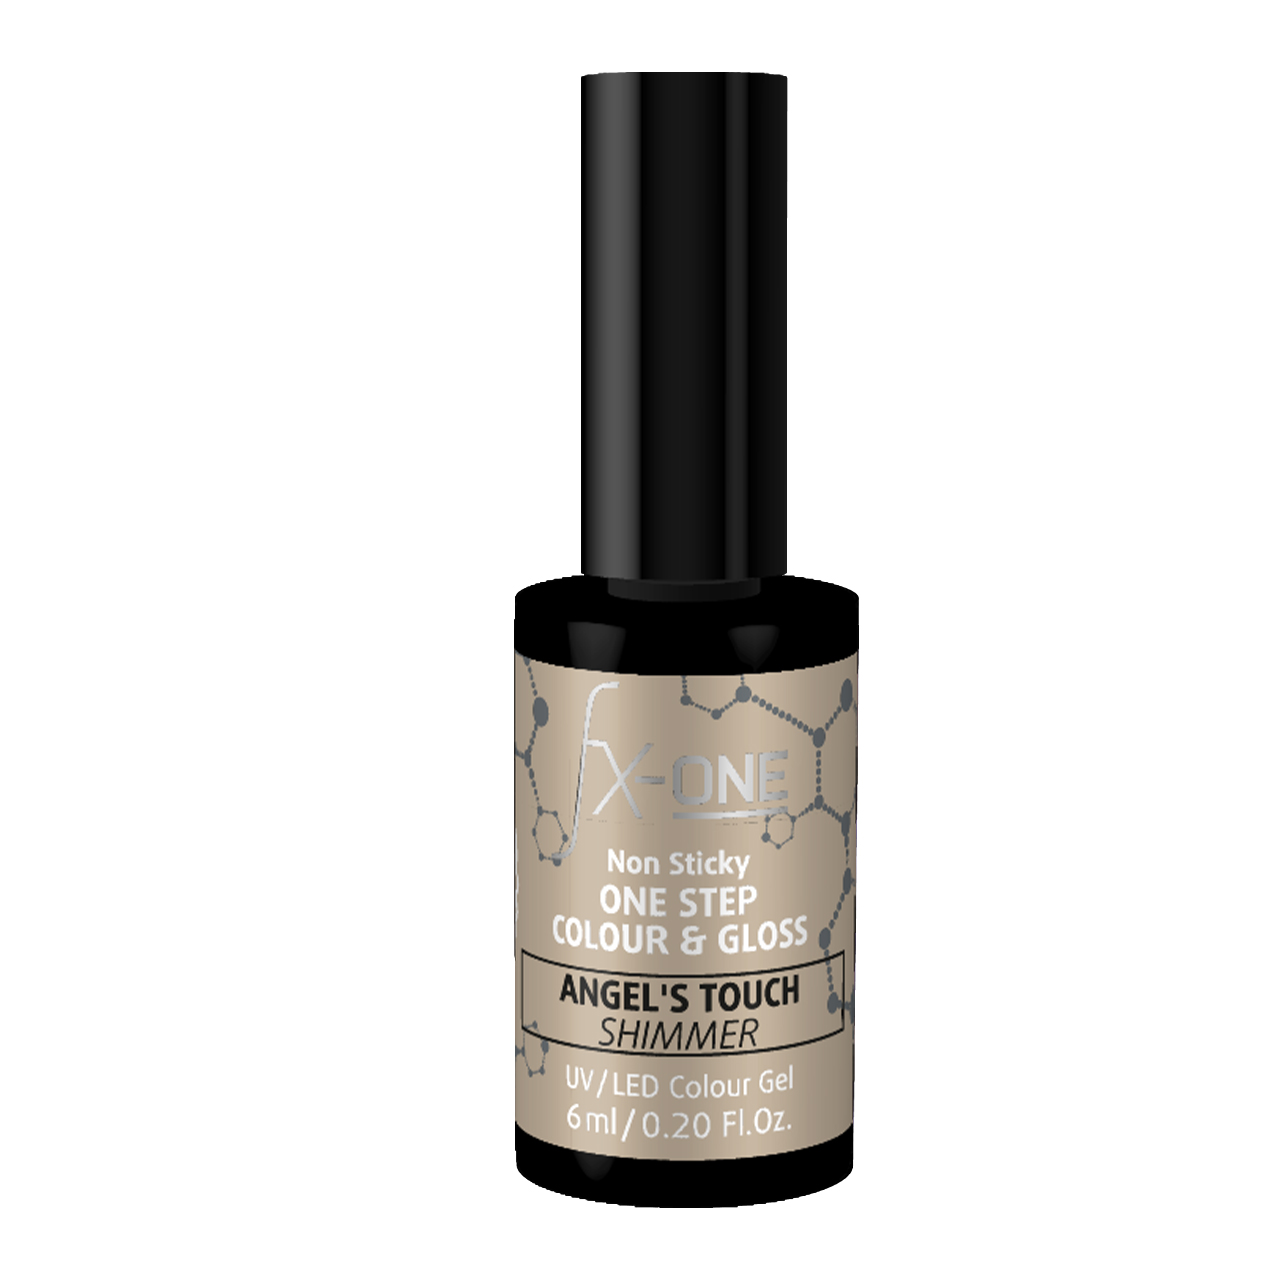 FX-ONE Colour & Gloss Angels's Touch 6ml